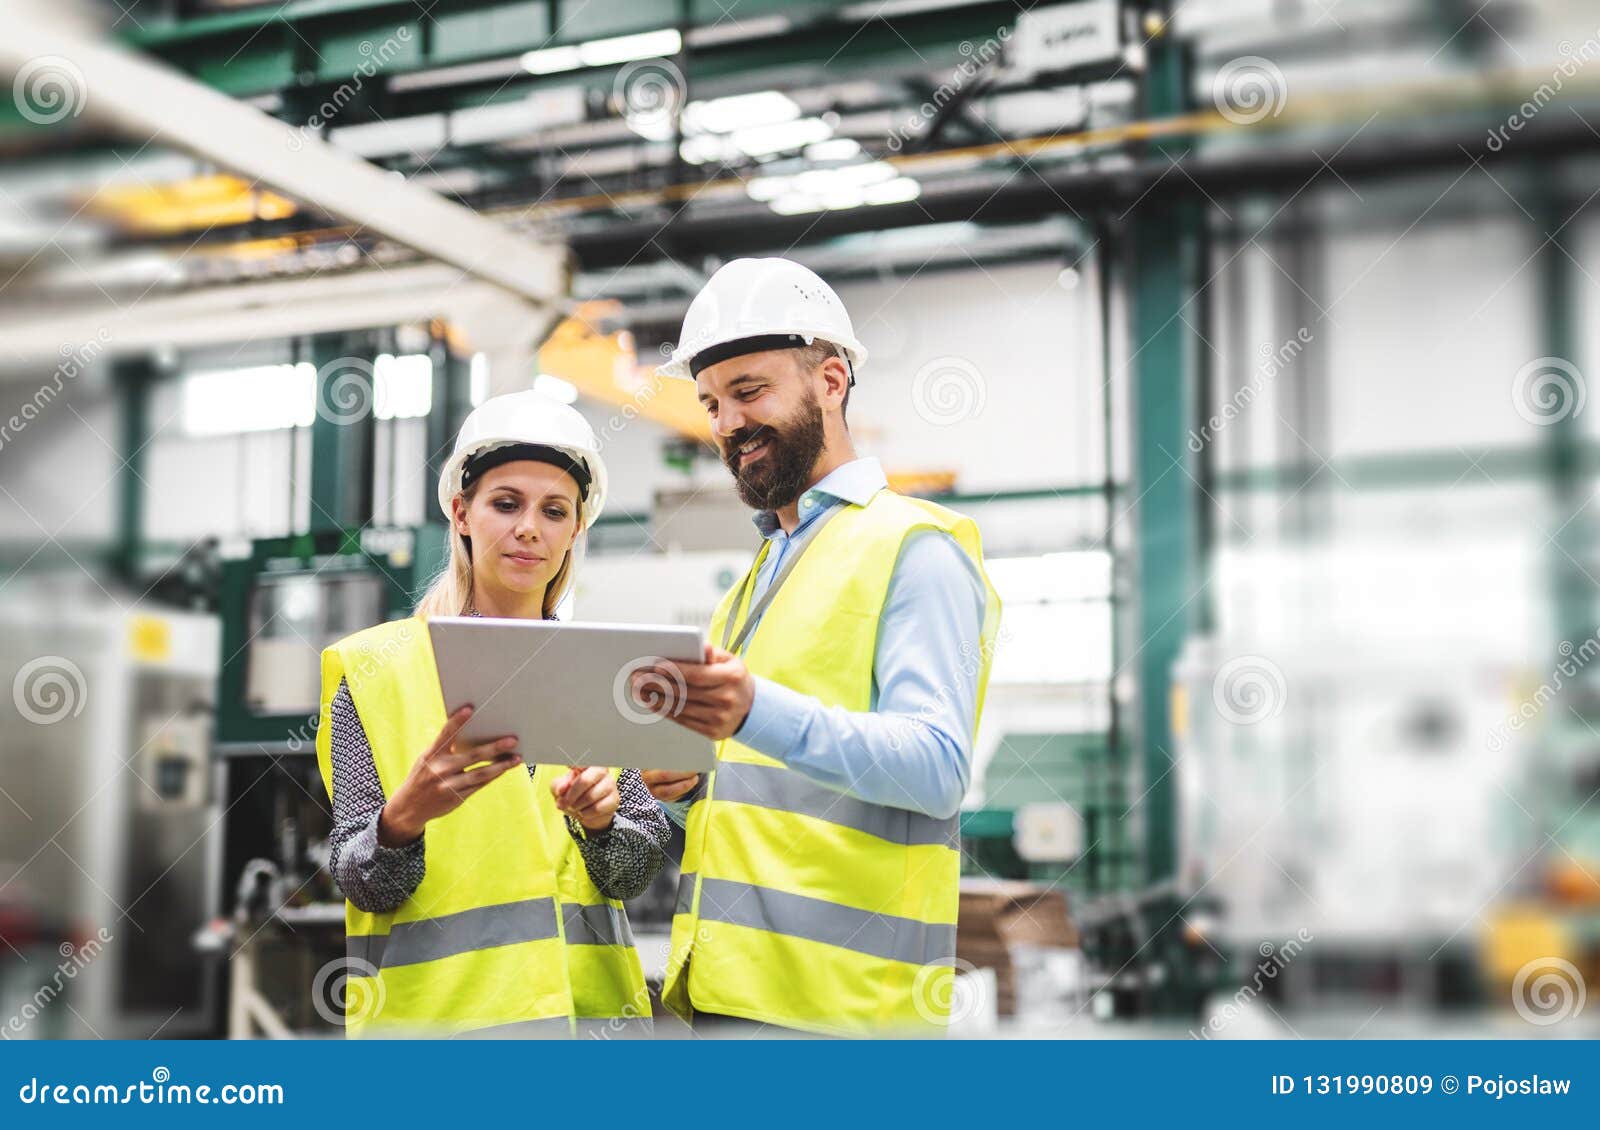 a portrait of an industrial man and woman engineer with tablet in a factory, talking.